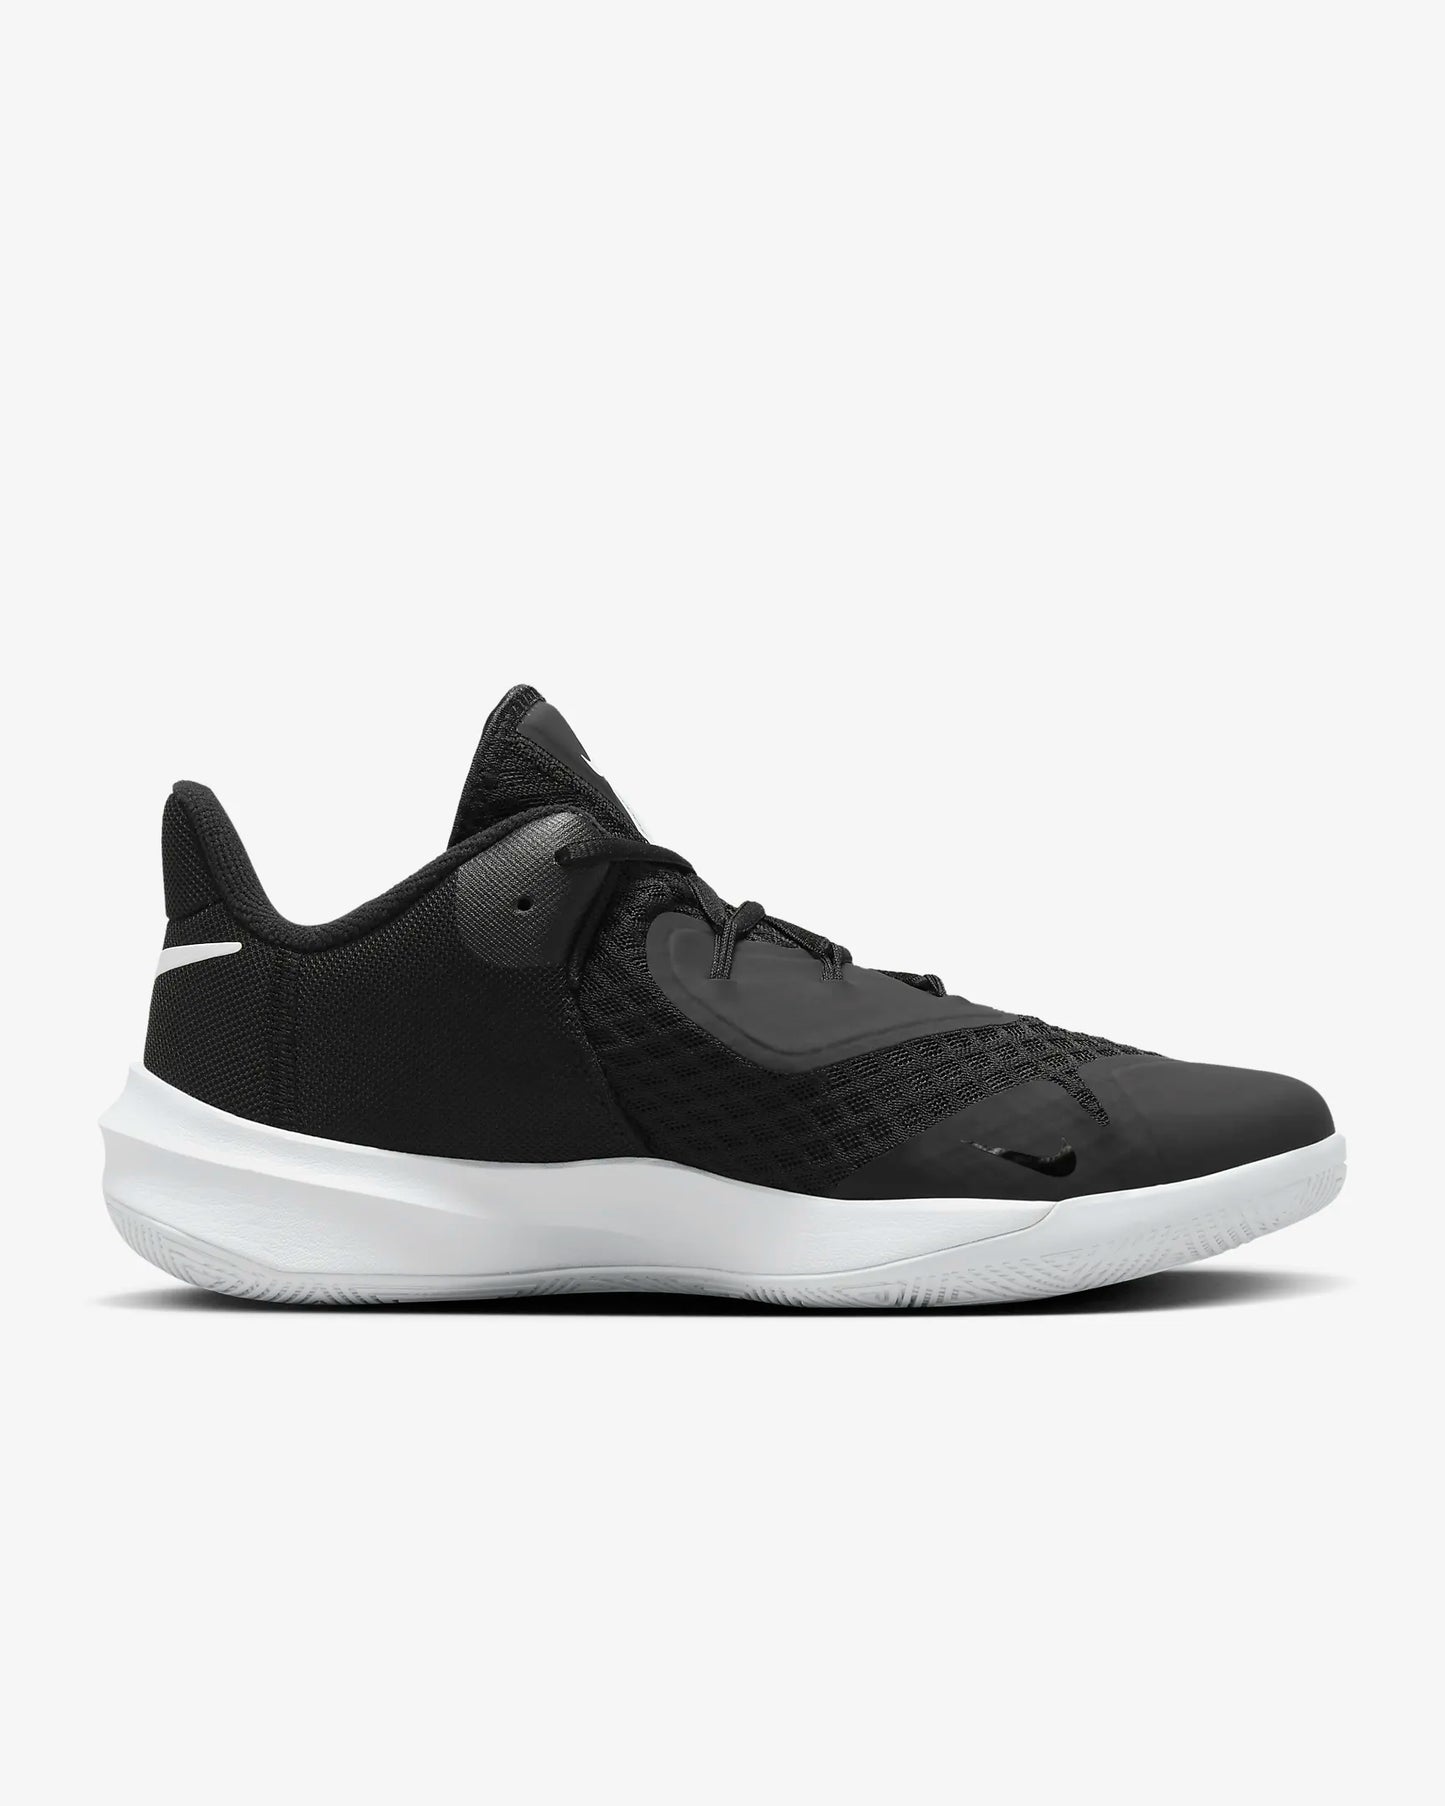 Nike Zoom Hyperspeed court Shoes (Black)